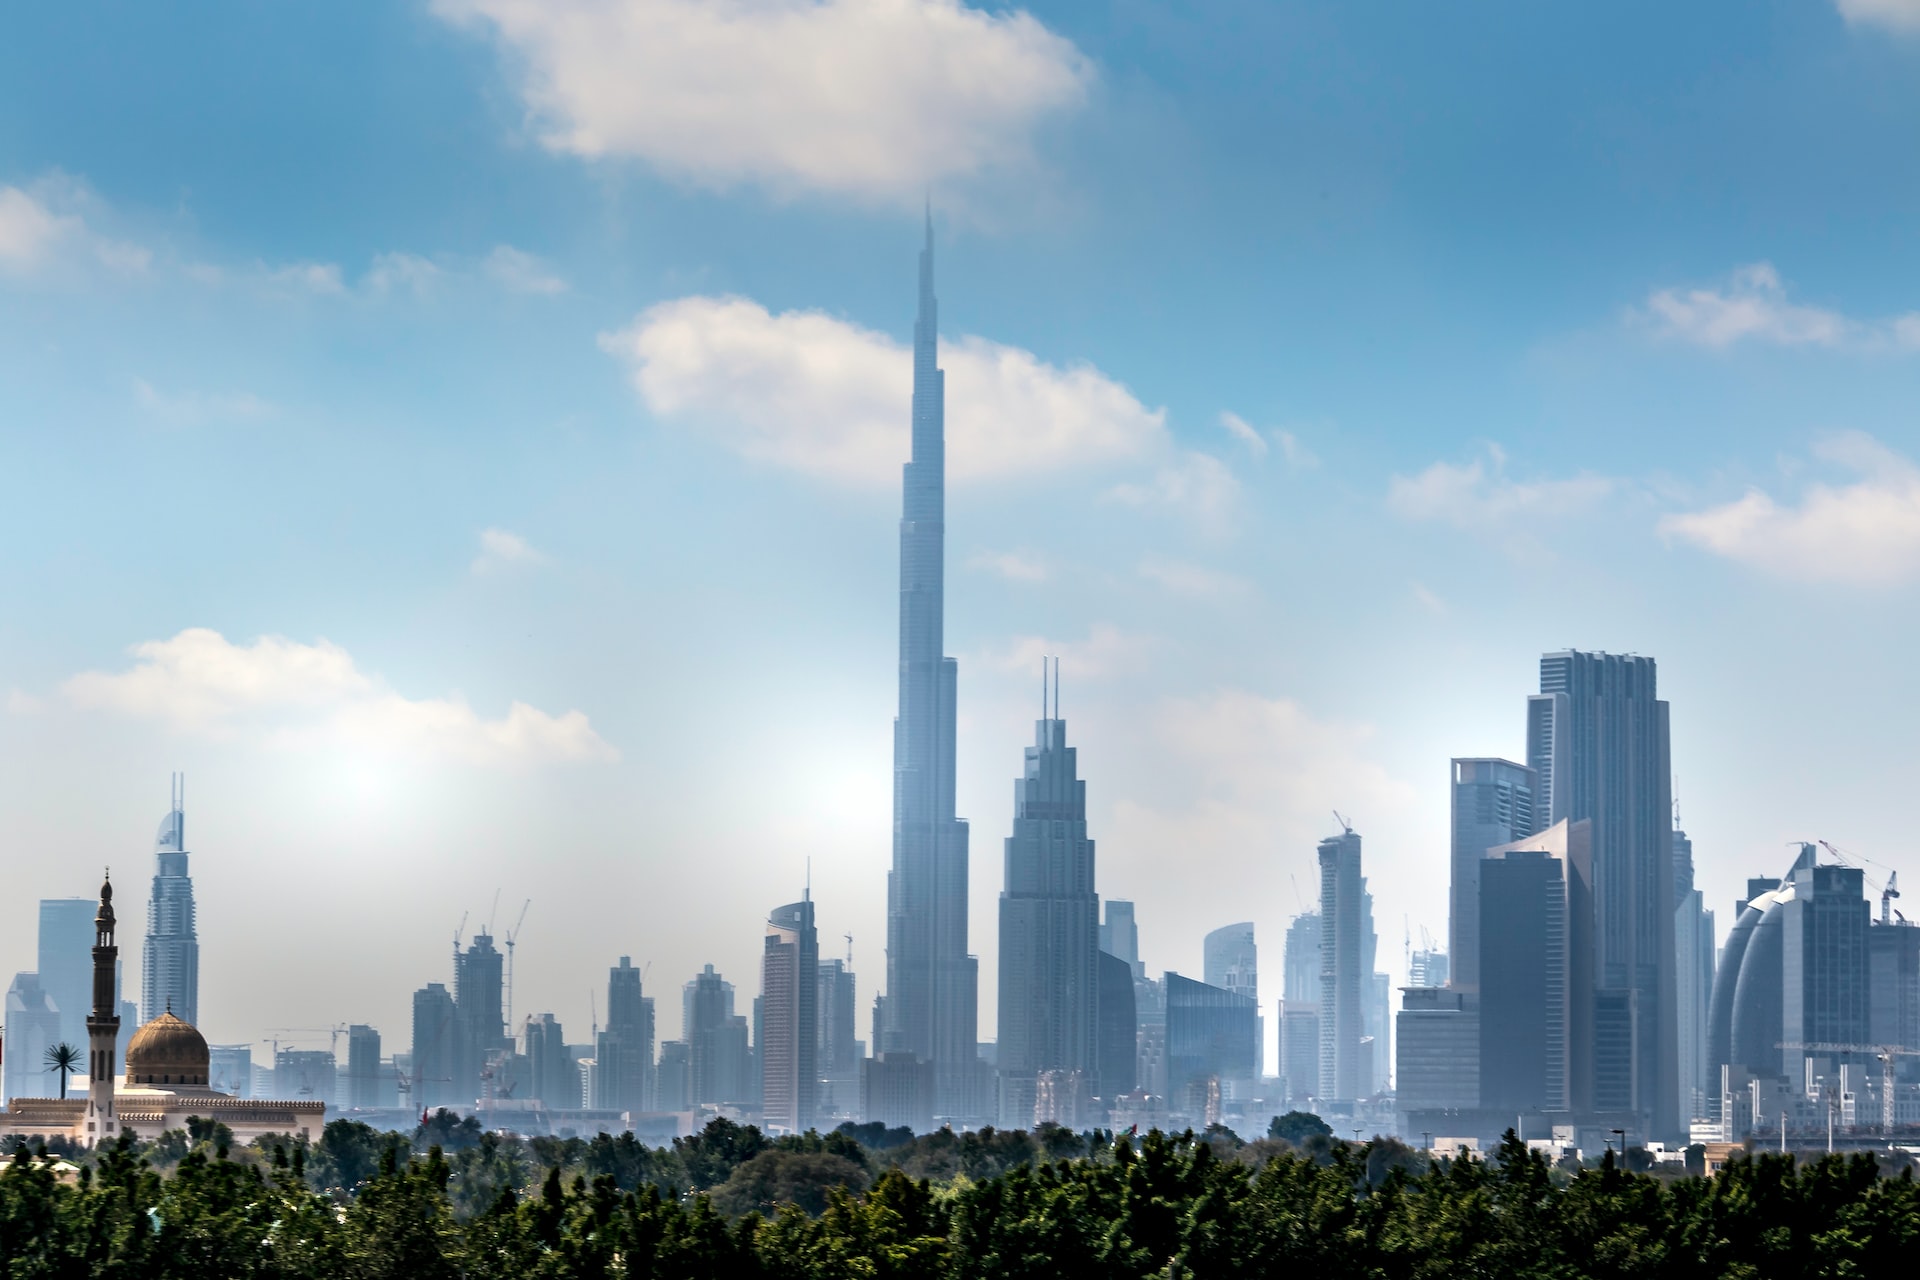 What are the dos and don’ts in the course of Dubai Trip?